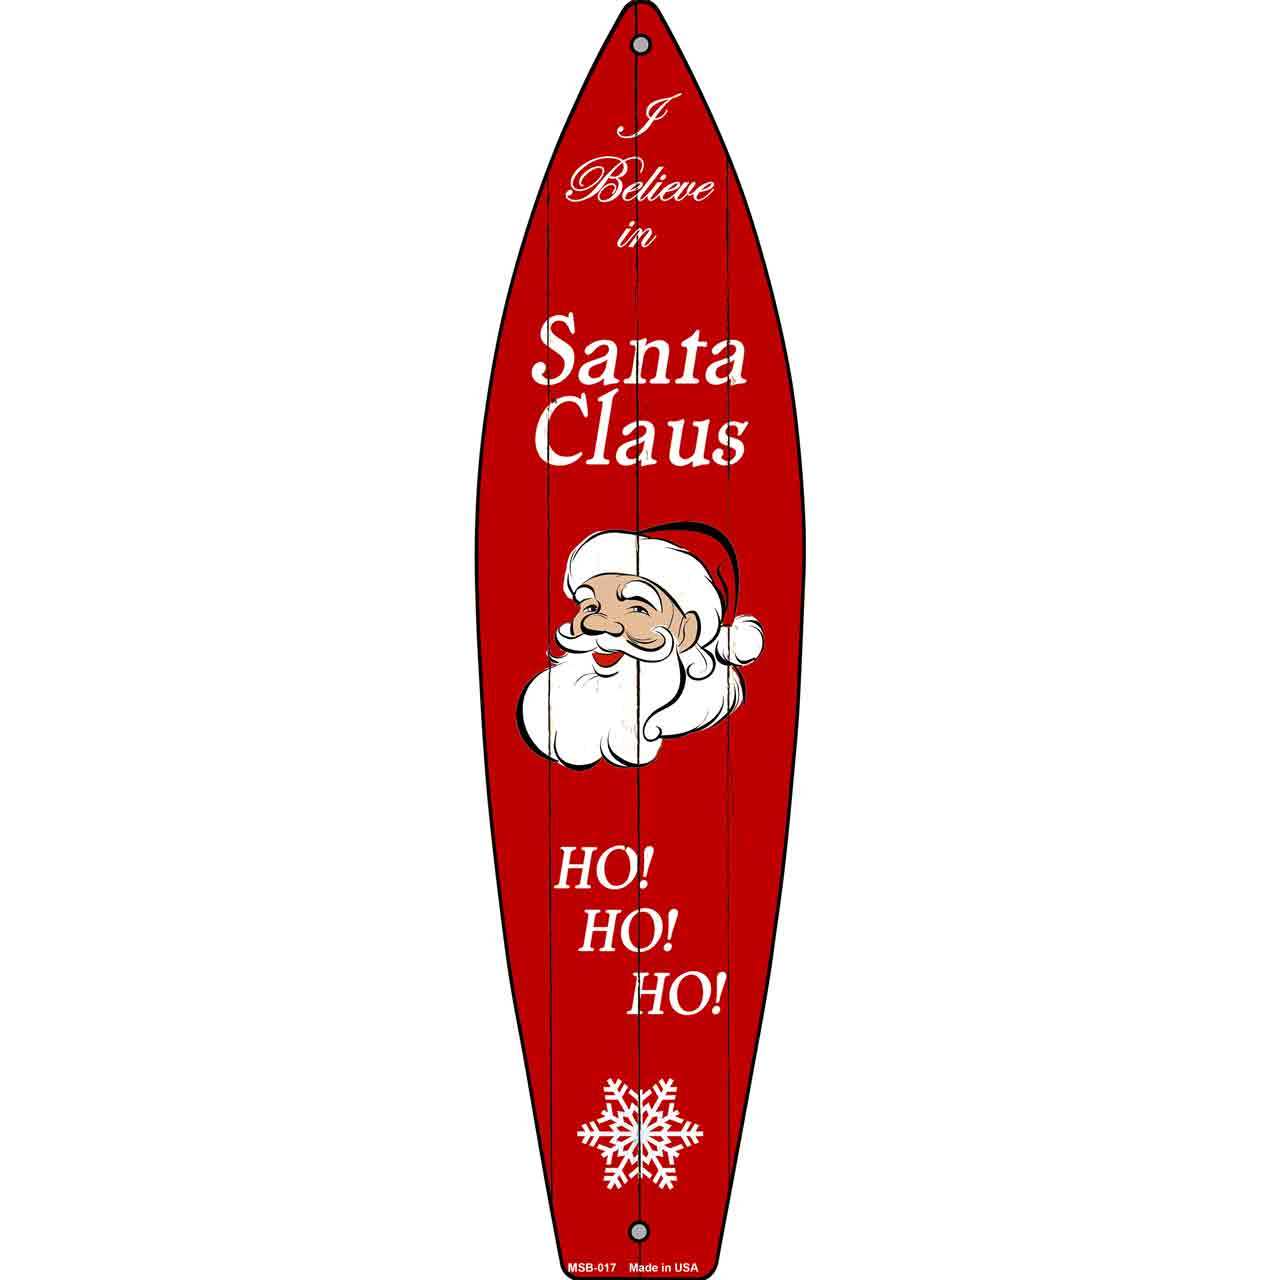 Primary image for Santa Claus Novelty Mini Metal Surfboard Sign